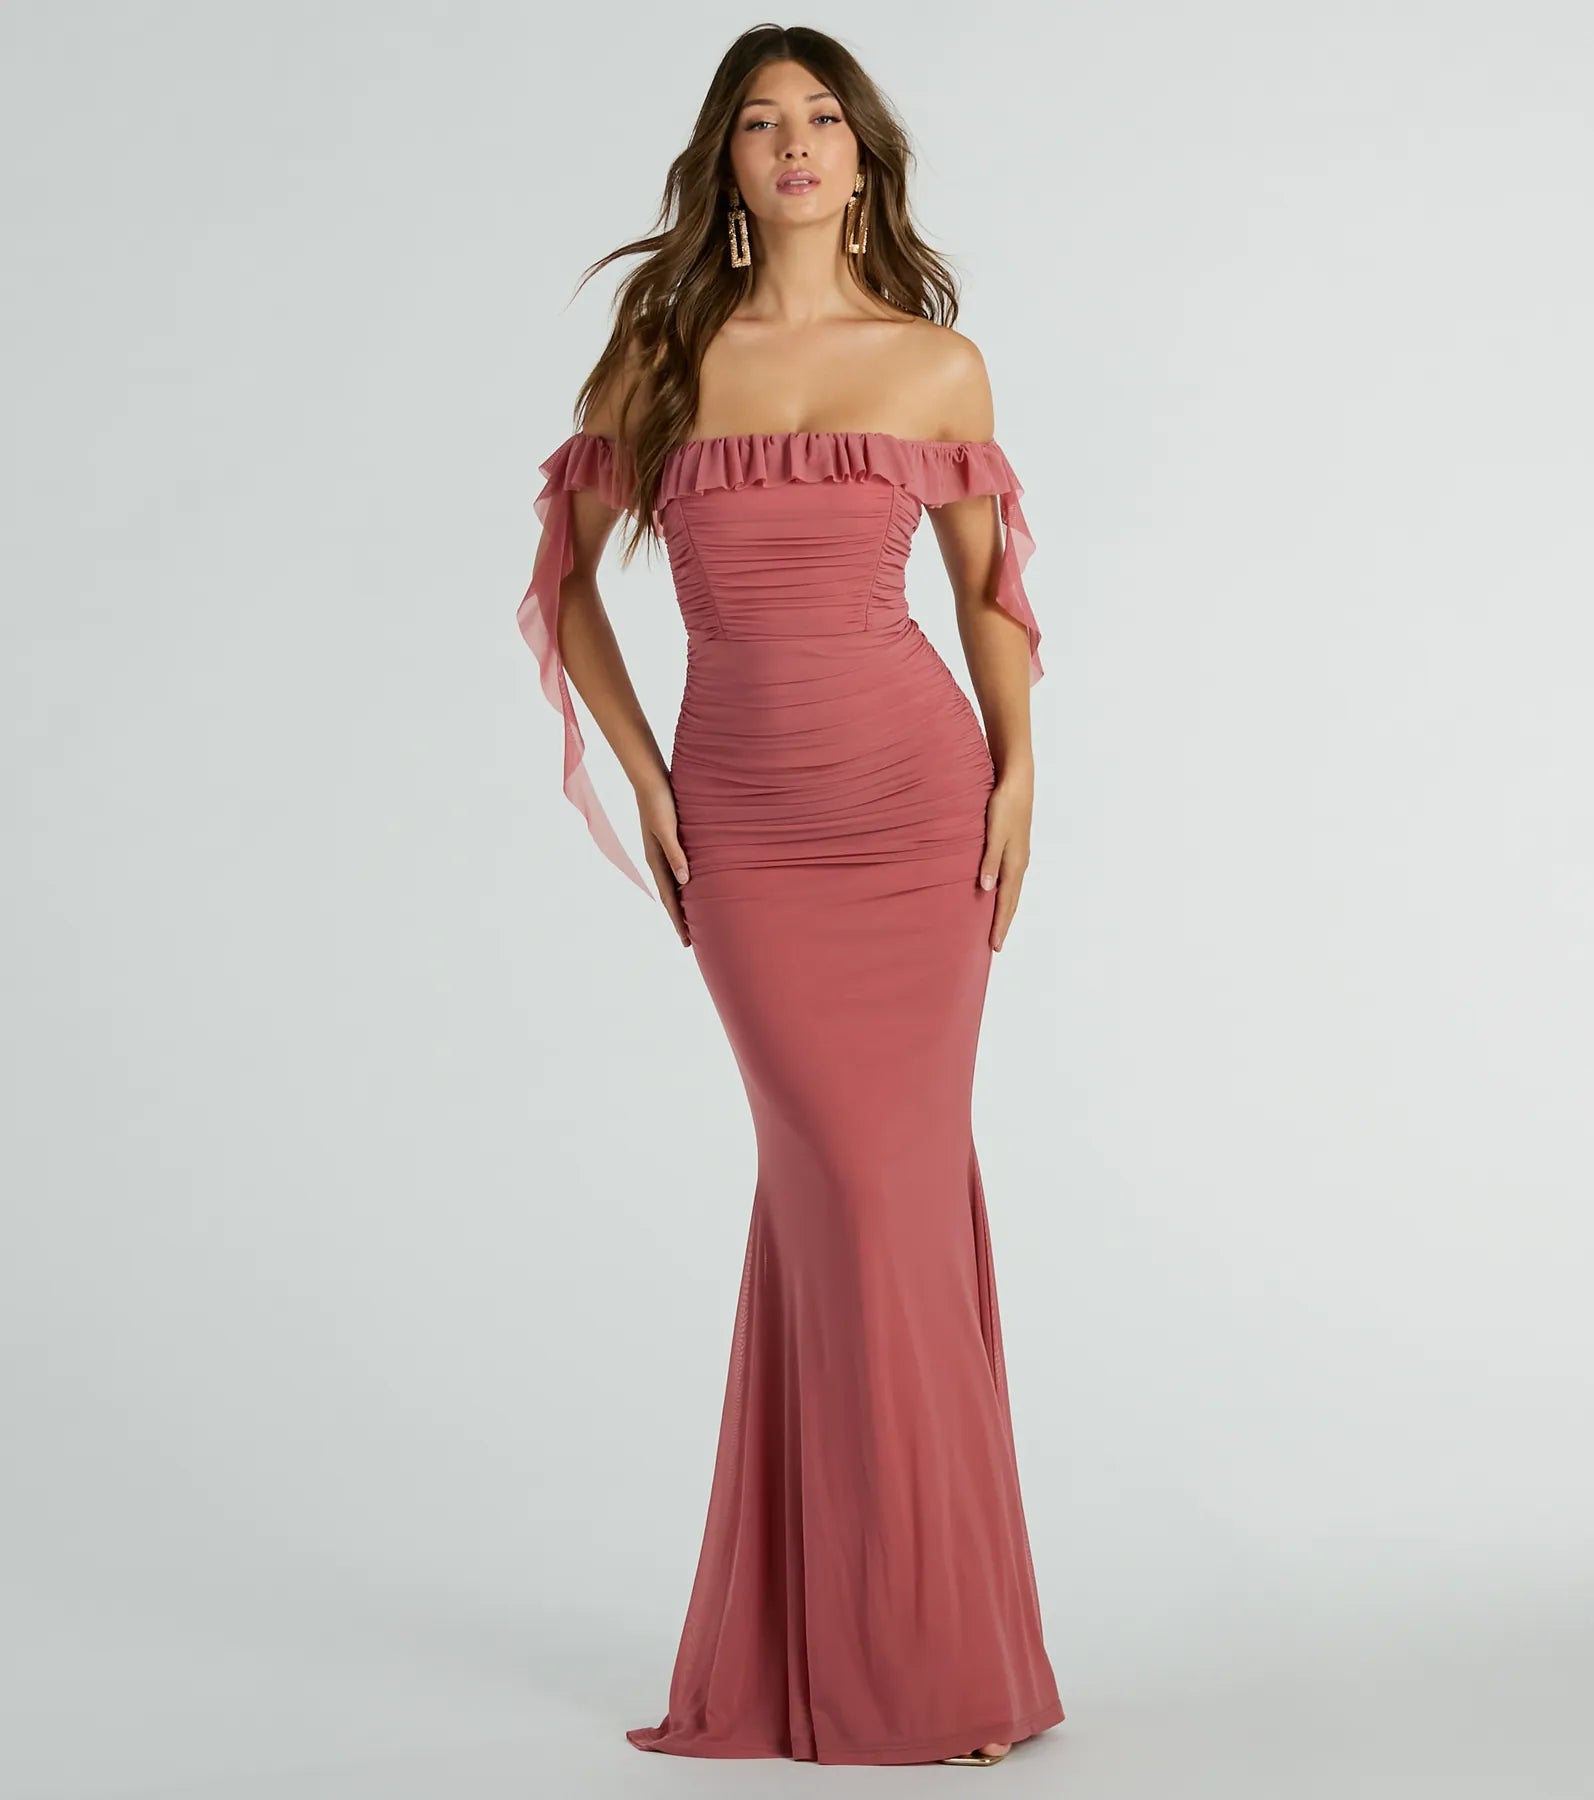 Sexy Sophisticated Ruched Stretchy Mesh Knit Off the Shoulder Mermaid Maxi Dress With Ruffles